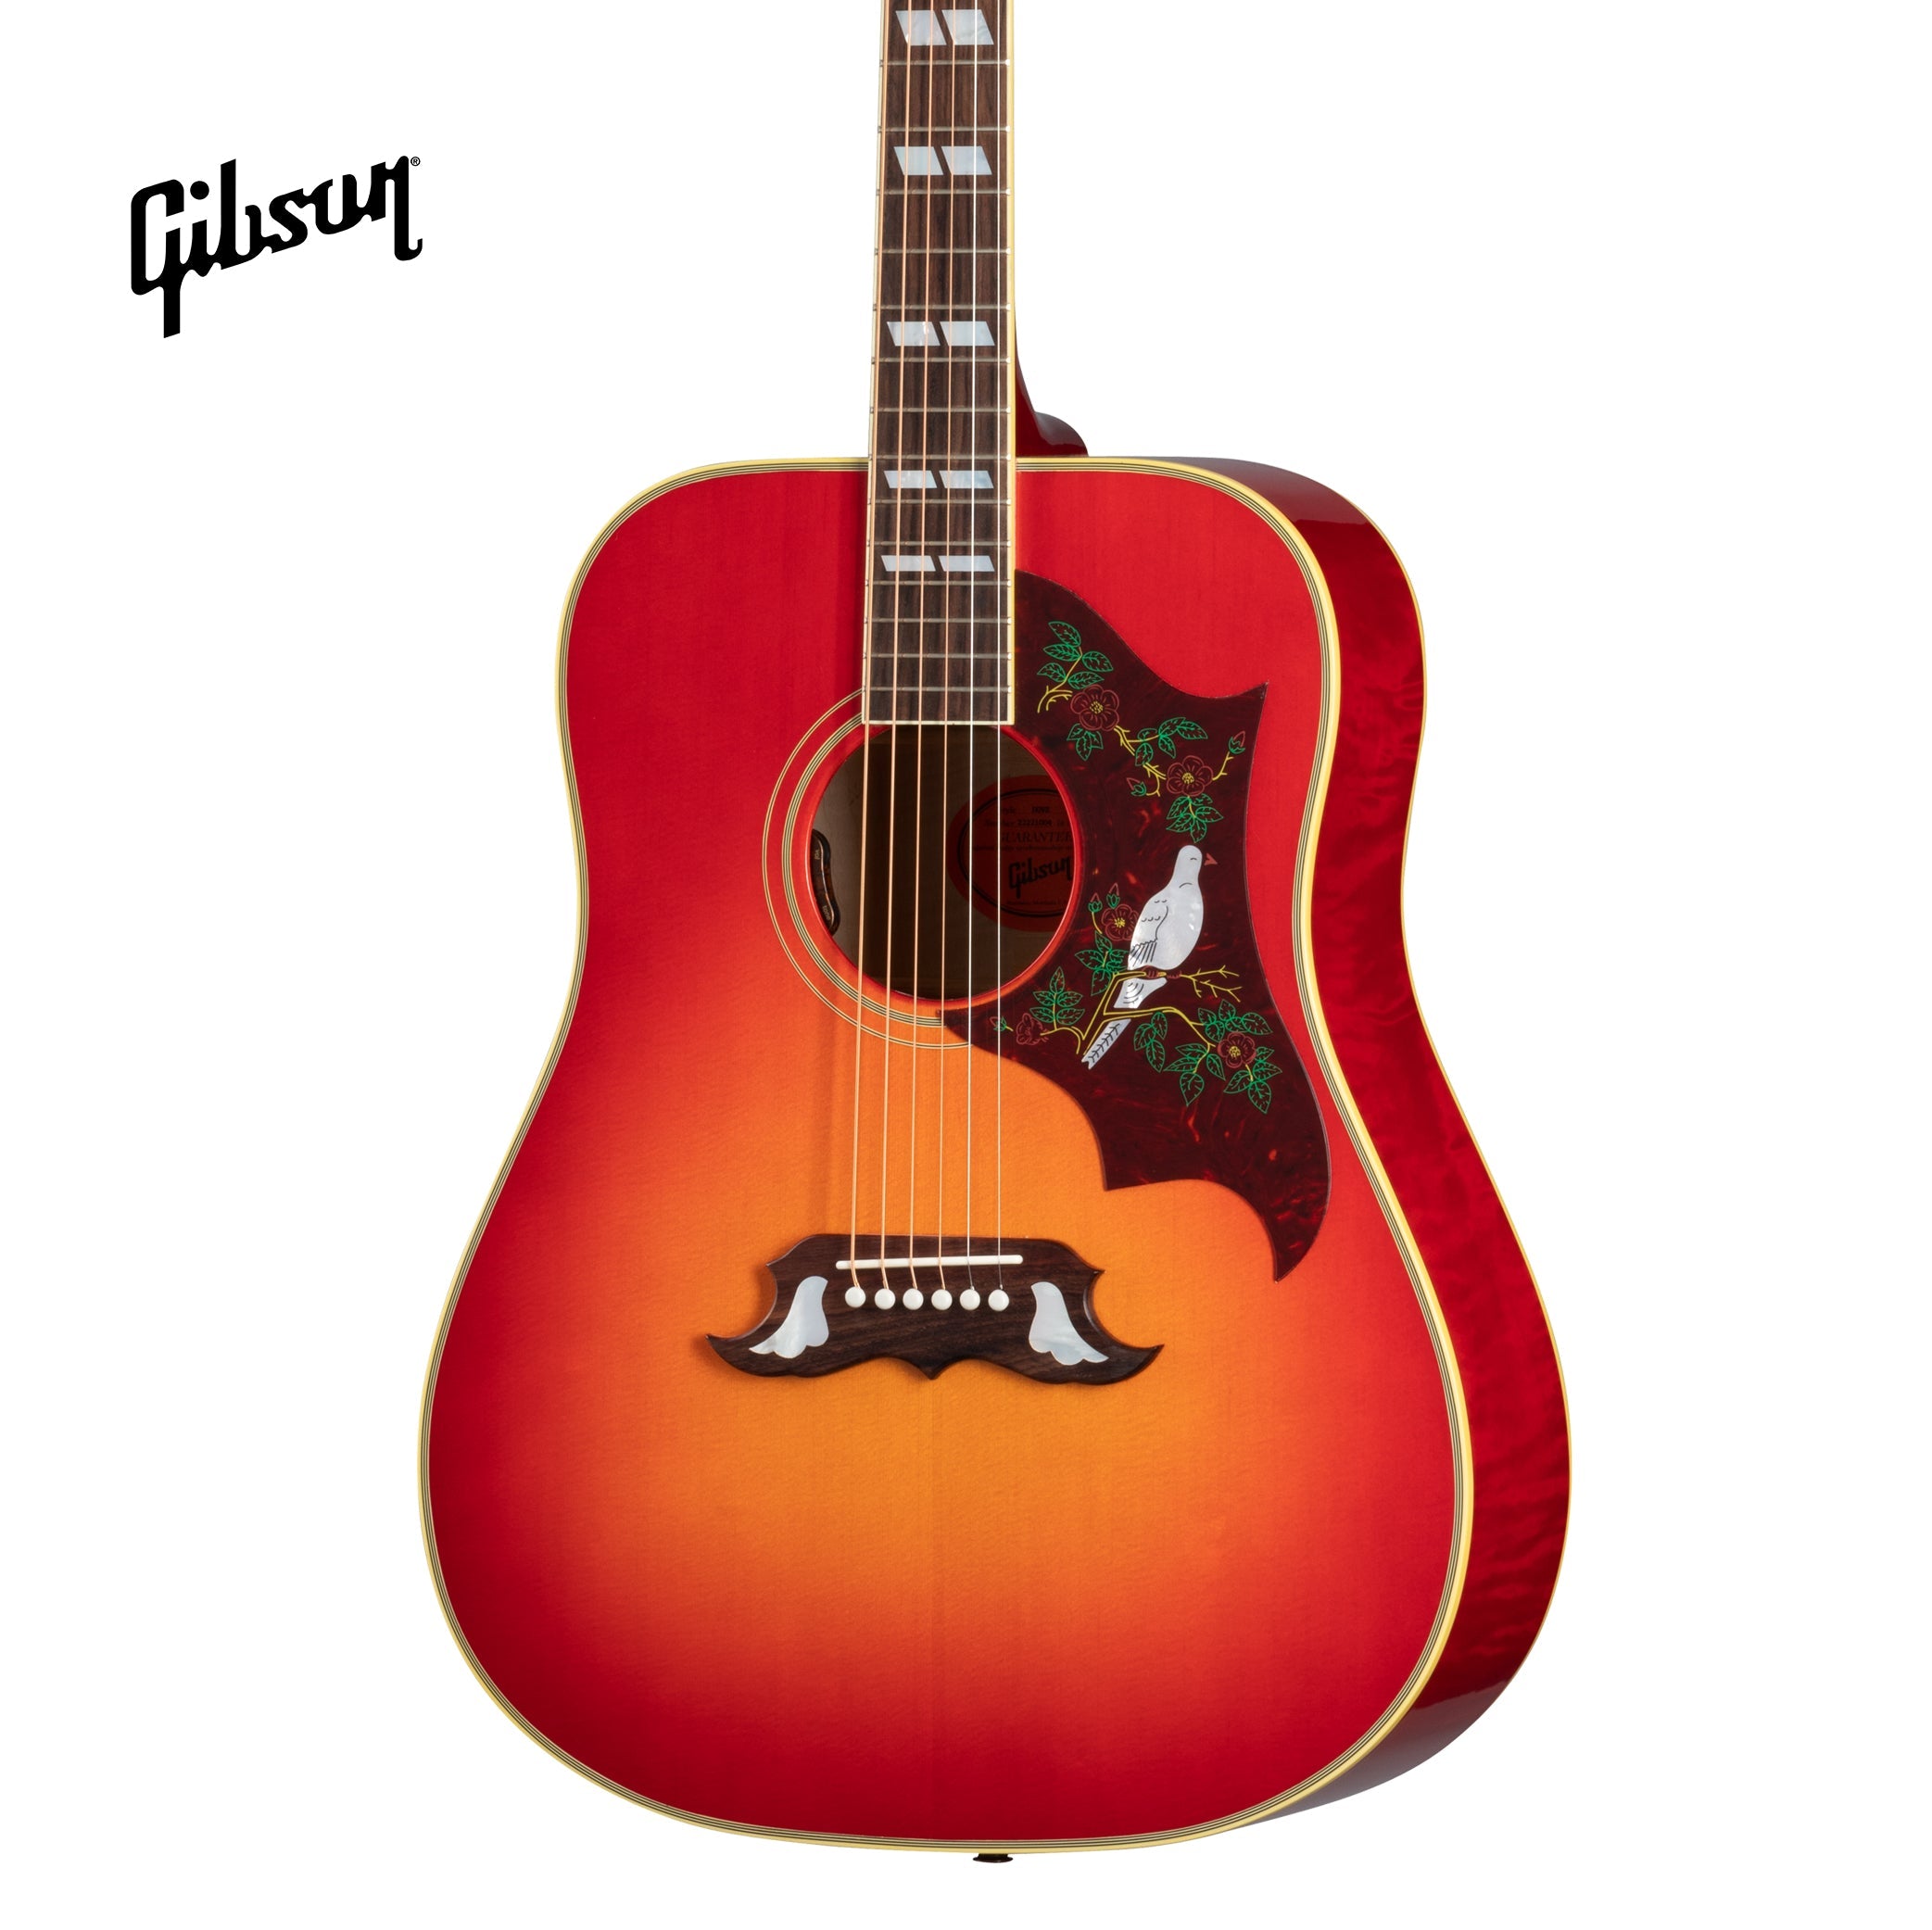 GIBSON SONGWRITER STANDARD ROSEWOOD ACOUSTIC-ELECTRIC GUITAR - ROSEWOO